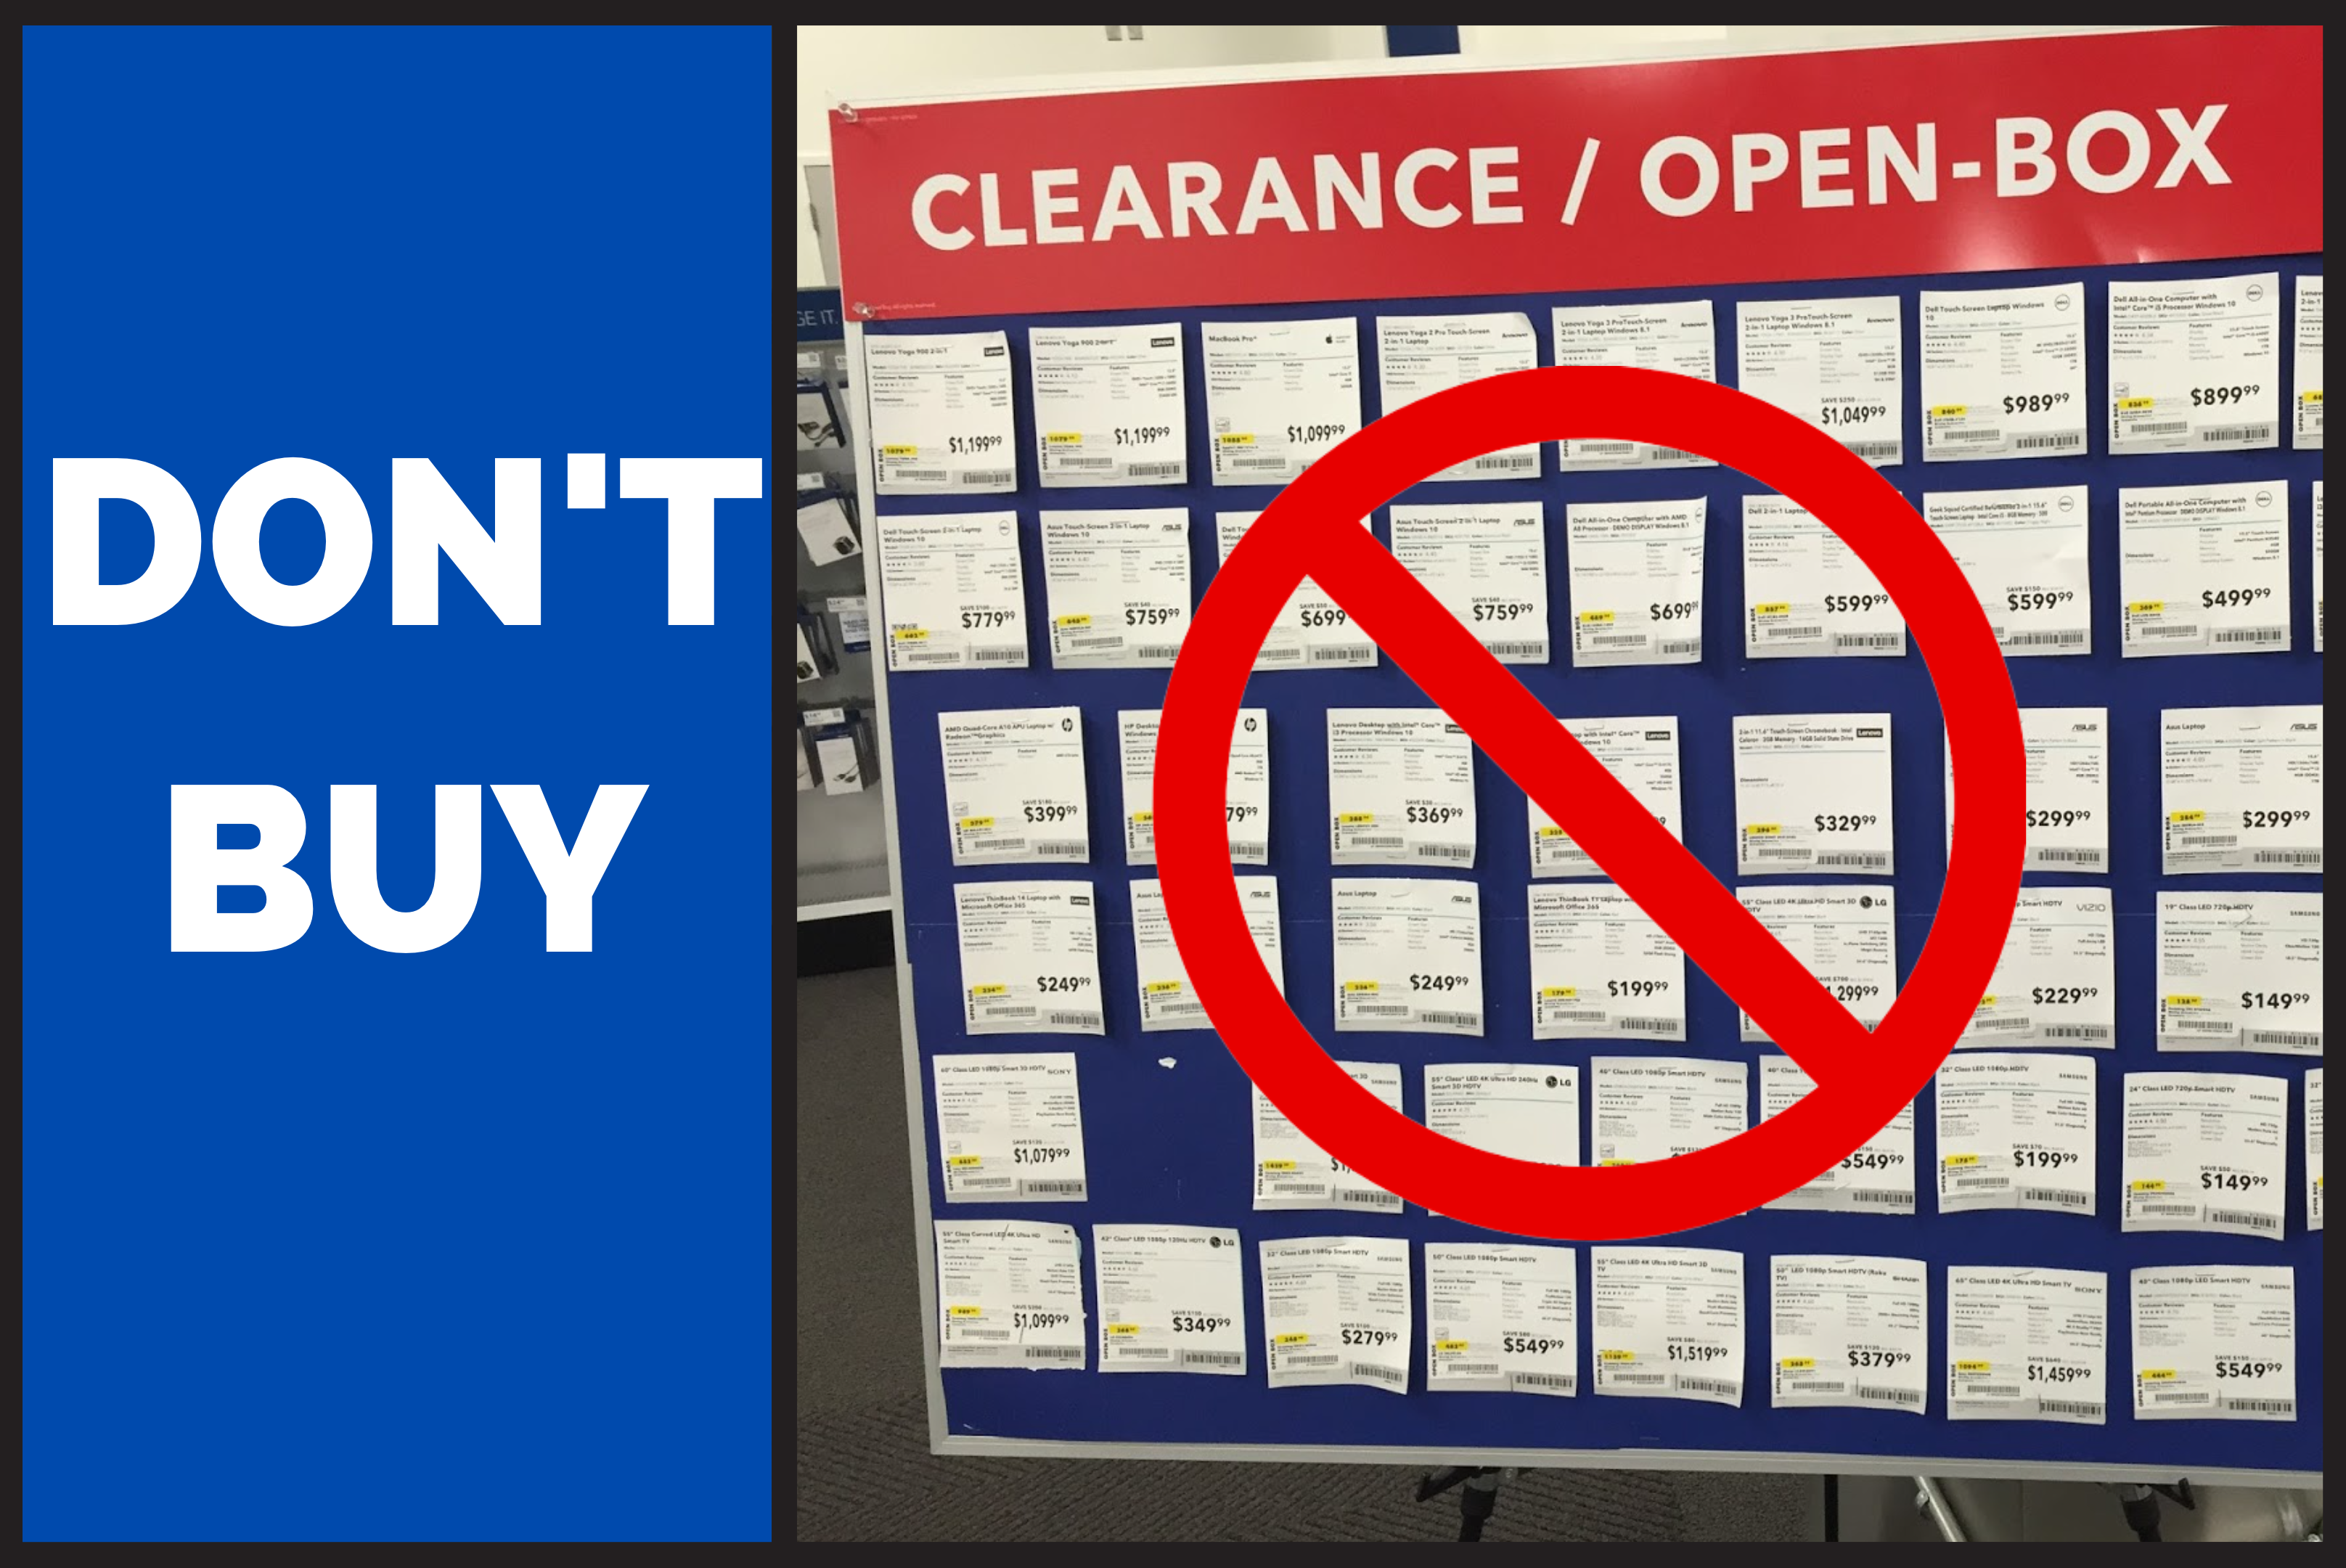 Here's why I won't buy a Best Buy Open Box product - dupeVS